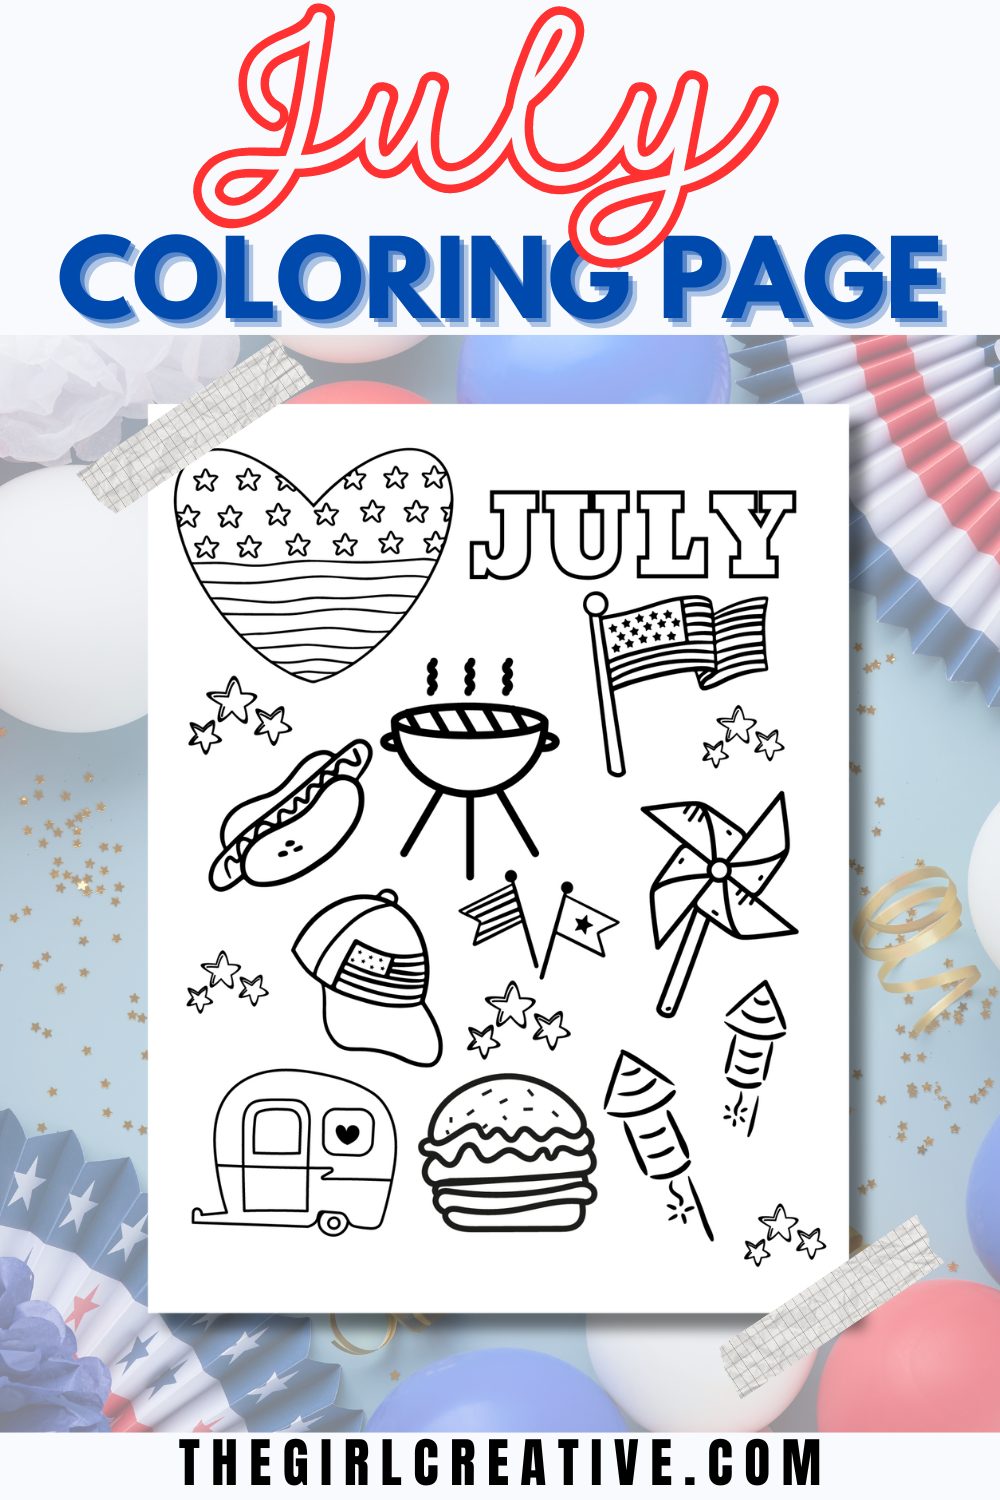 July Coloring Page for Kids FREE